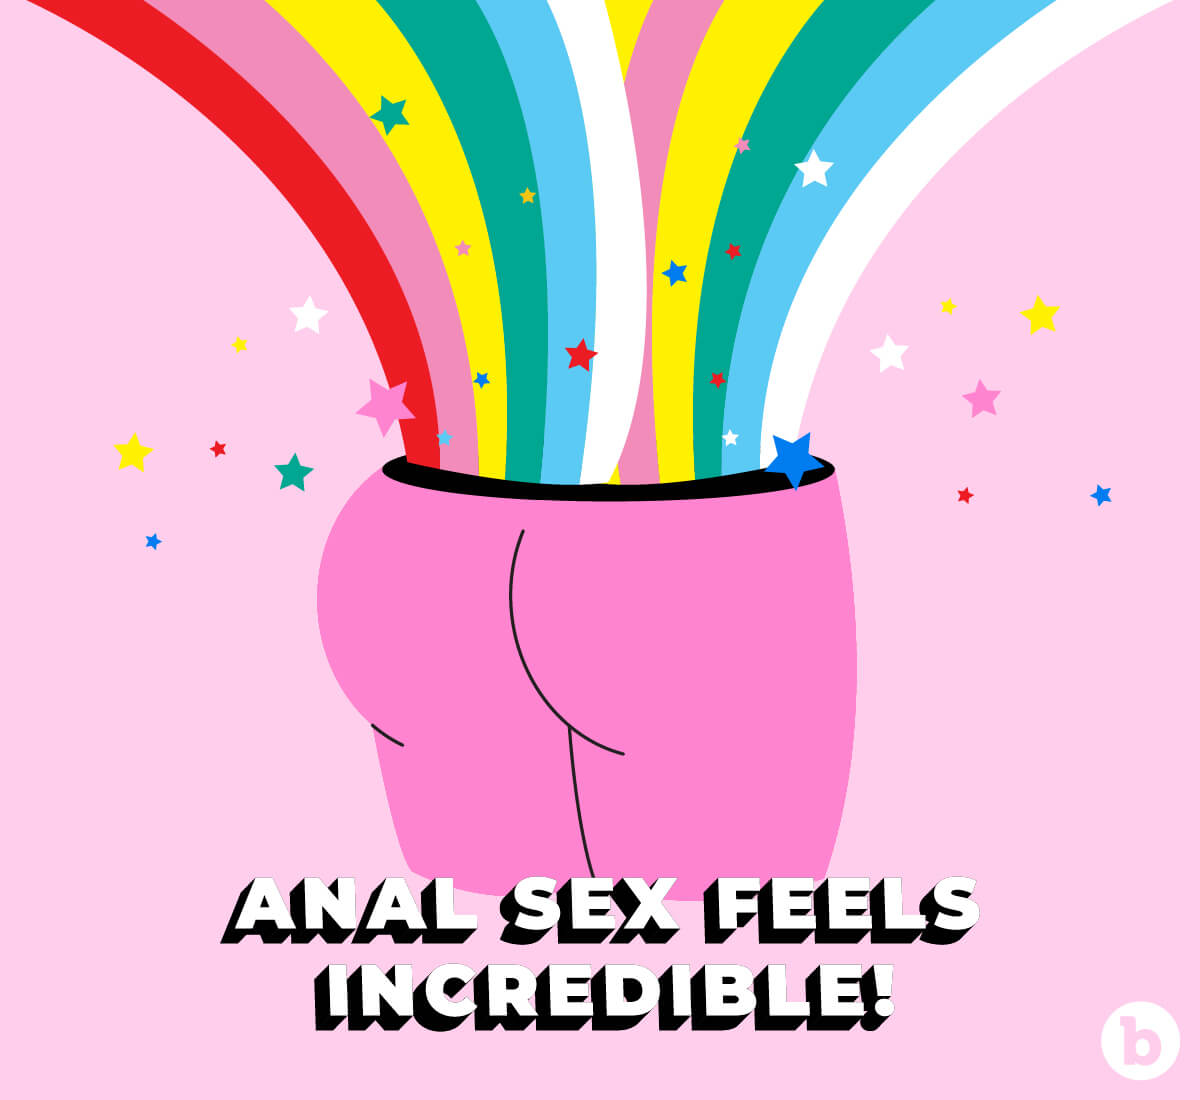 Anal sex is for everybody and feels absolutely incredible